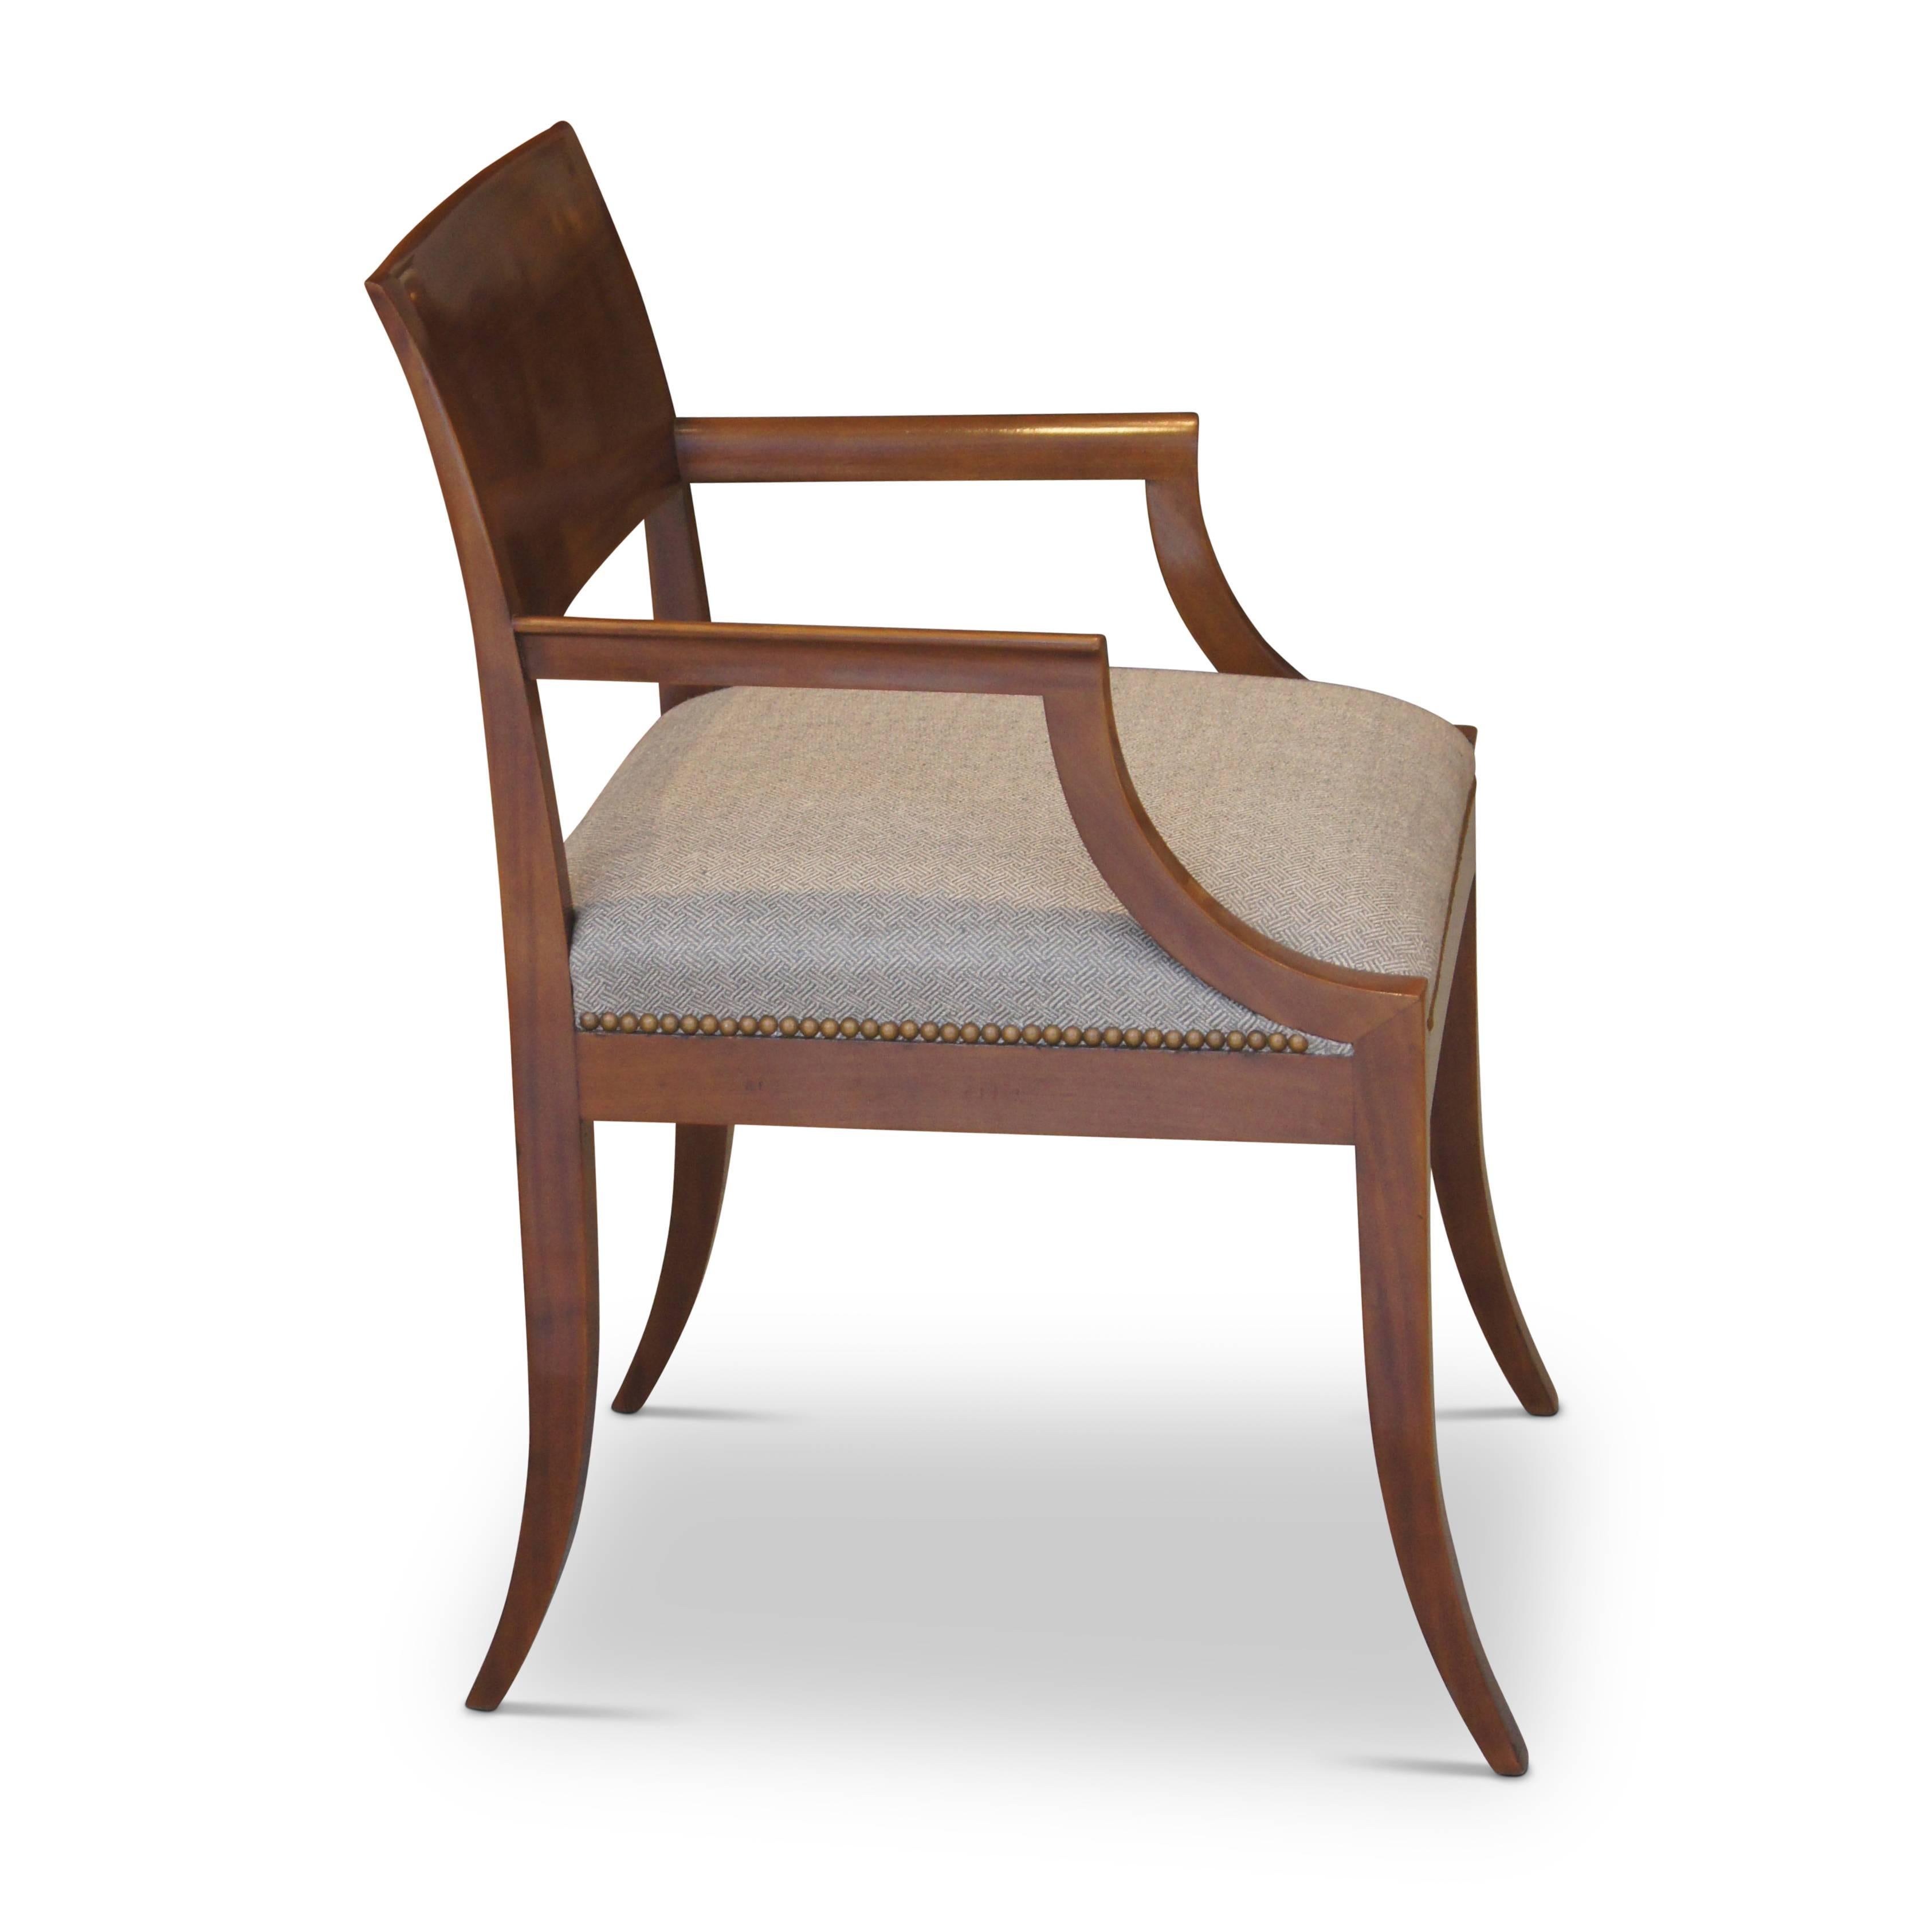 Pair of elegant Art Deco armchairs in mahogany by esteemed Danish cabinetmaker Rud Rasmussen, featuring crisp lines, klismos-style back rail, sabered legs and arms stepped back with cavetto supports. Crafted in 1927 (as verified by the RR archives